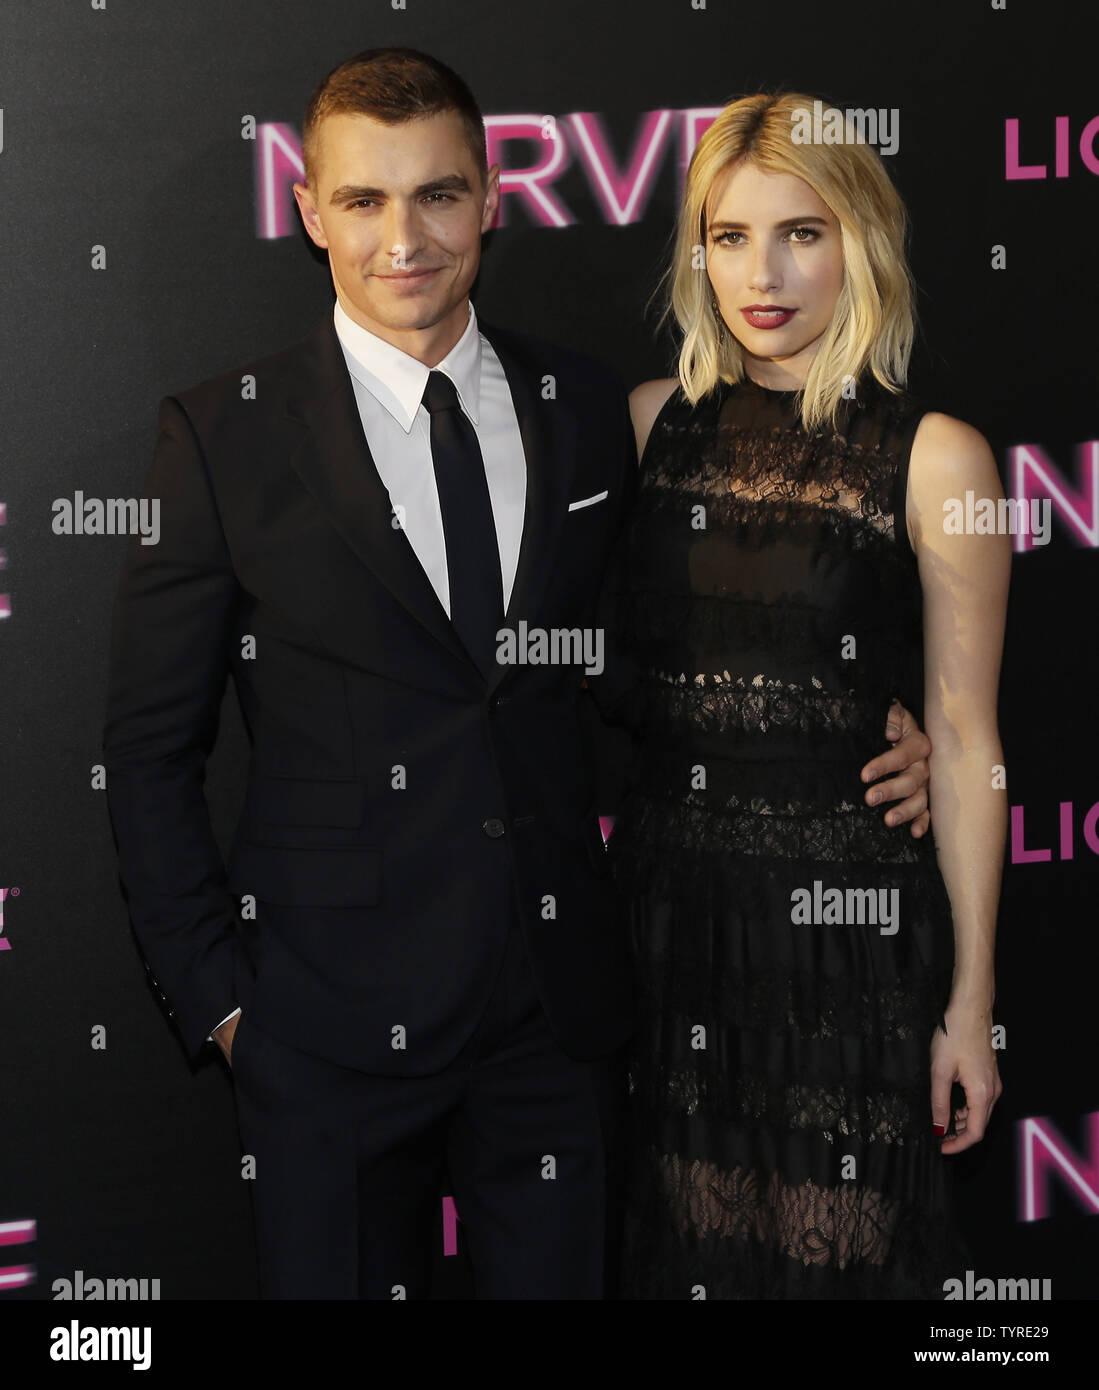 Dave Franco And Emma Roberts Arrive On The Red Carpet At The Nerve New York Premiere At Sva Theater On July 12 2016 In New York City Photo By John Angelilloupi TYRE29 